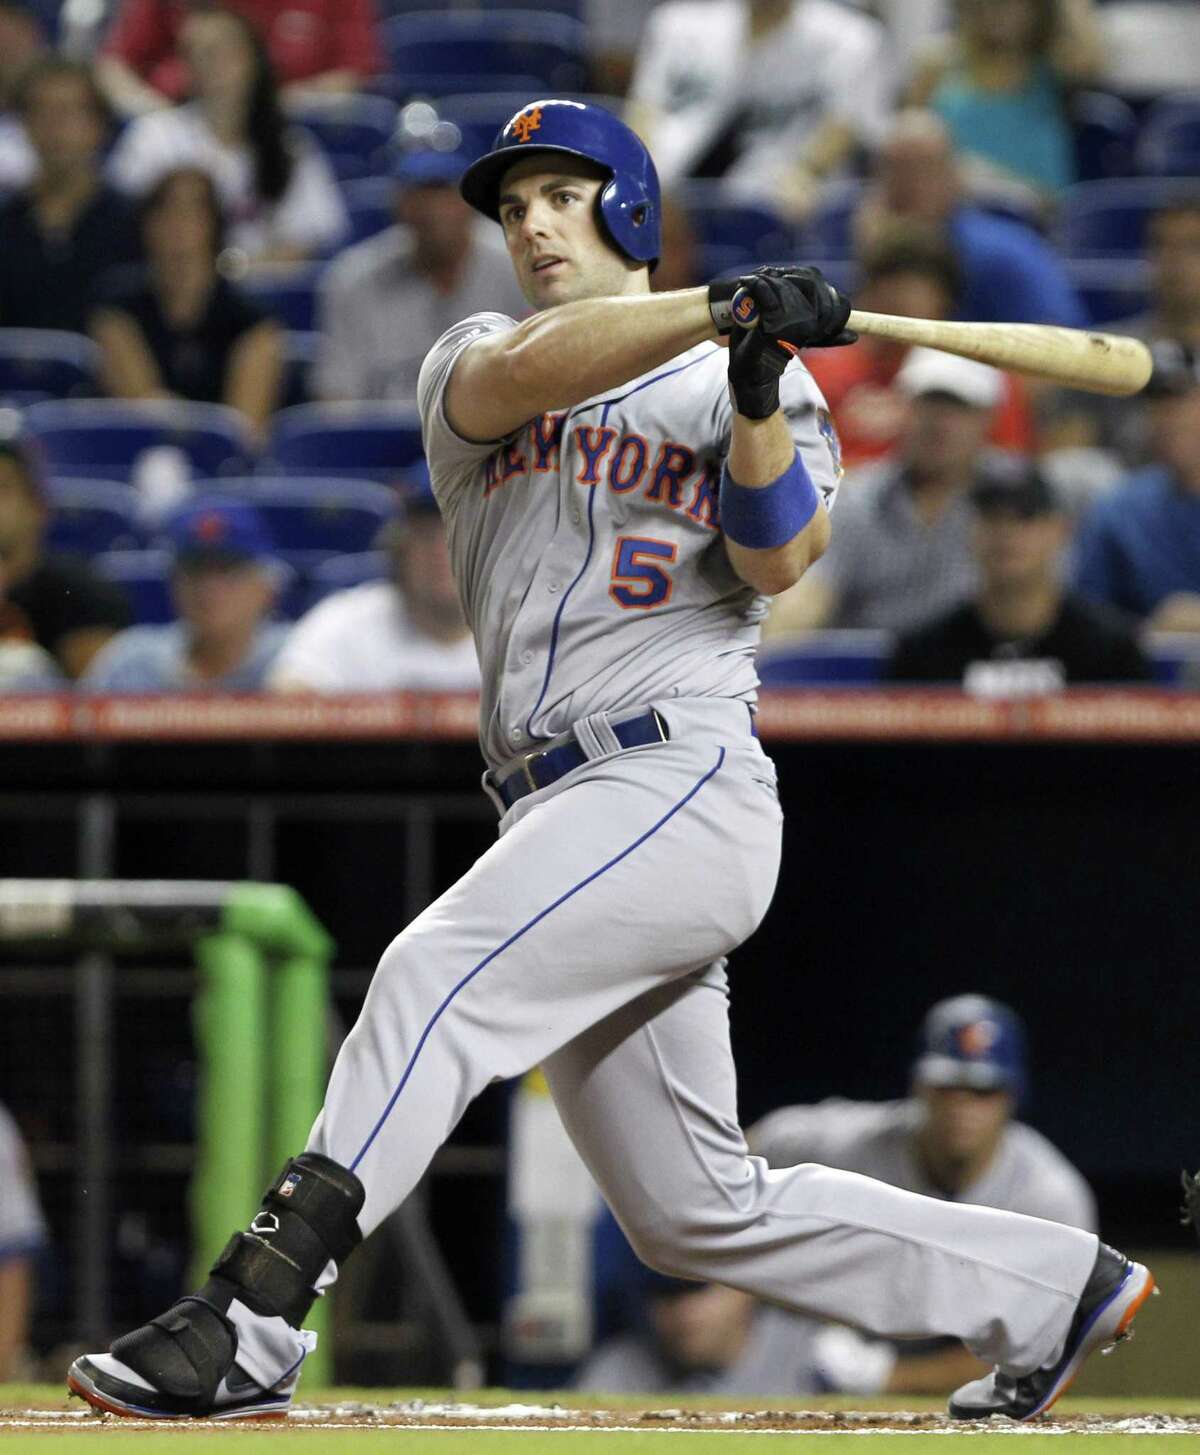 FILE - In this Oct. 2, 2012 file photo, New York Mets' David Wright follows through against the Miami Marlins during a baseball game in Miami. WFAN radio is reporting Friday, Nov. 30, 2012, that Wright and the New York Mets have agreed to a $138 million, eight-year contract that would be the richest in franchise history. (AP Photo/Alan Diaz, File)